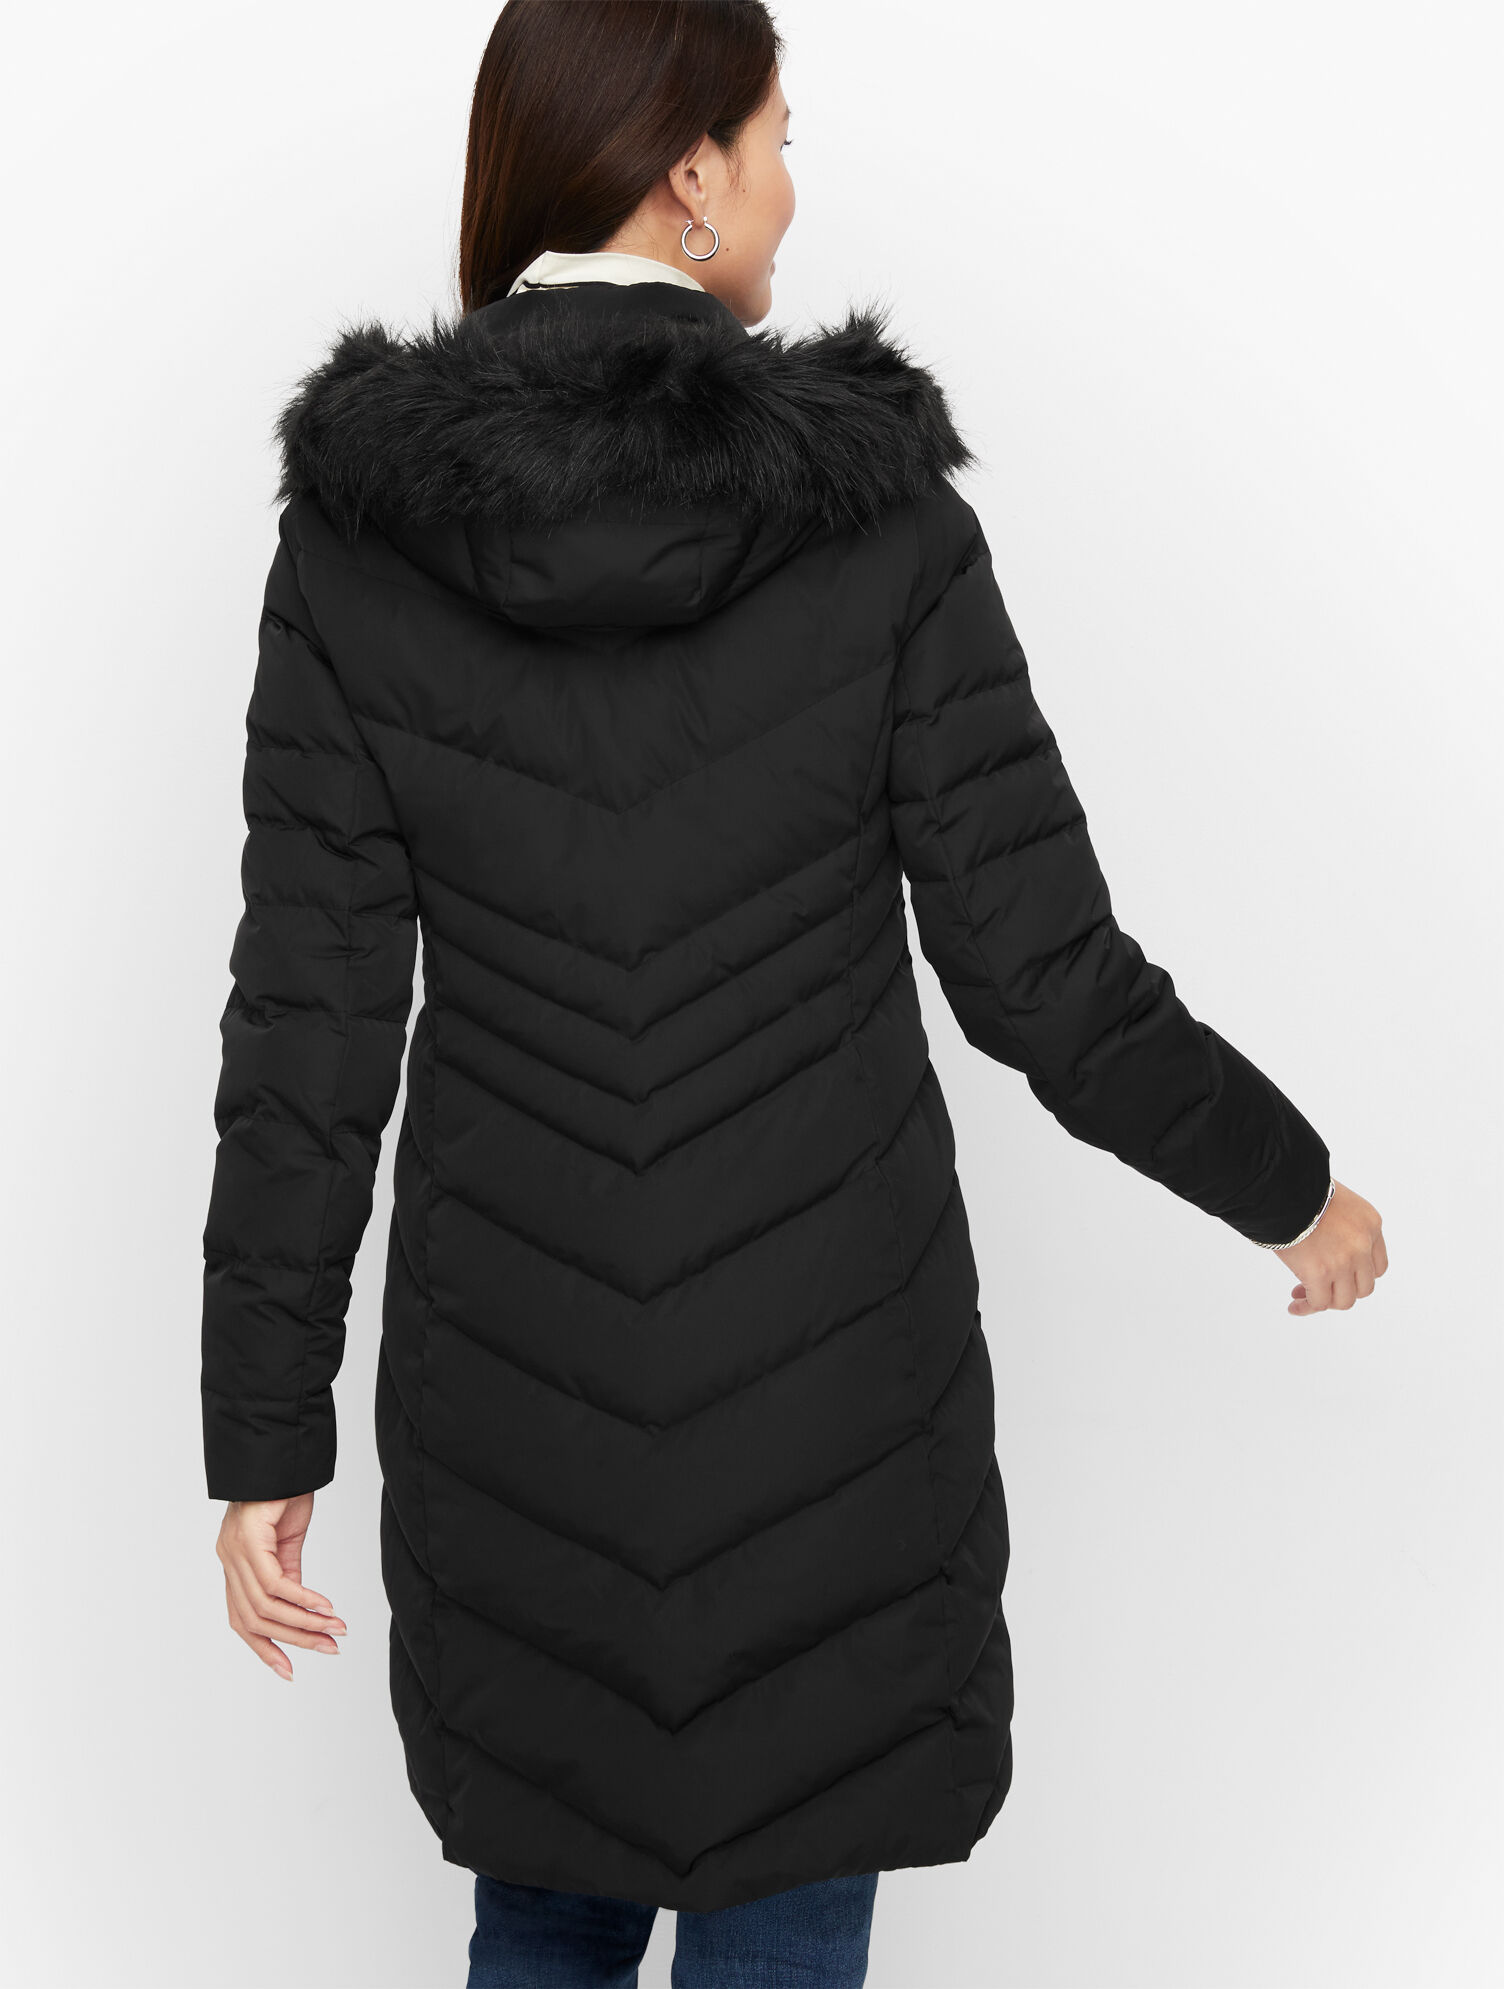 Esprit Mid Padded Jacket With Faux Fur Hood In Black Hotsell ...